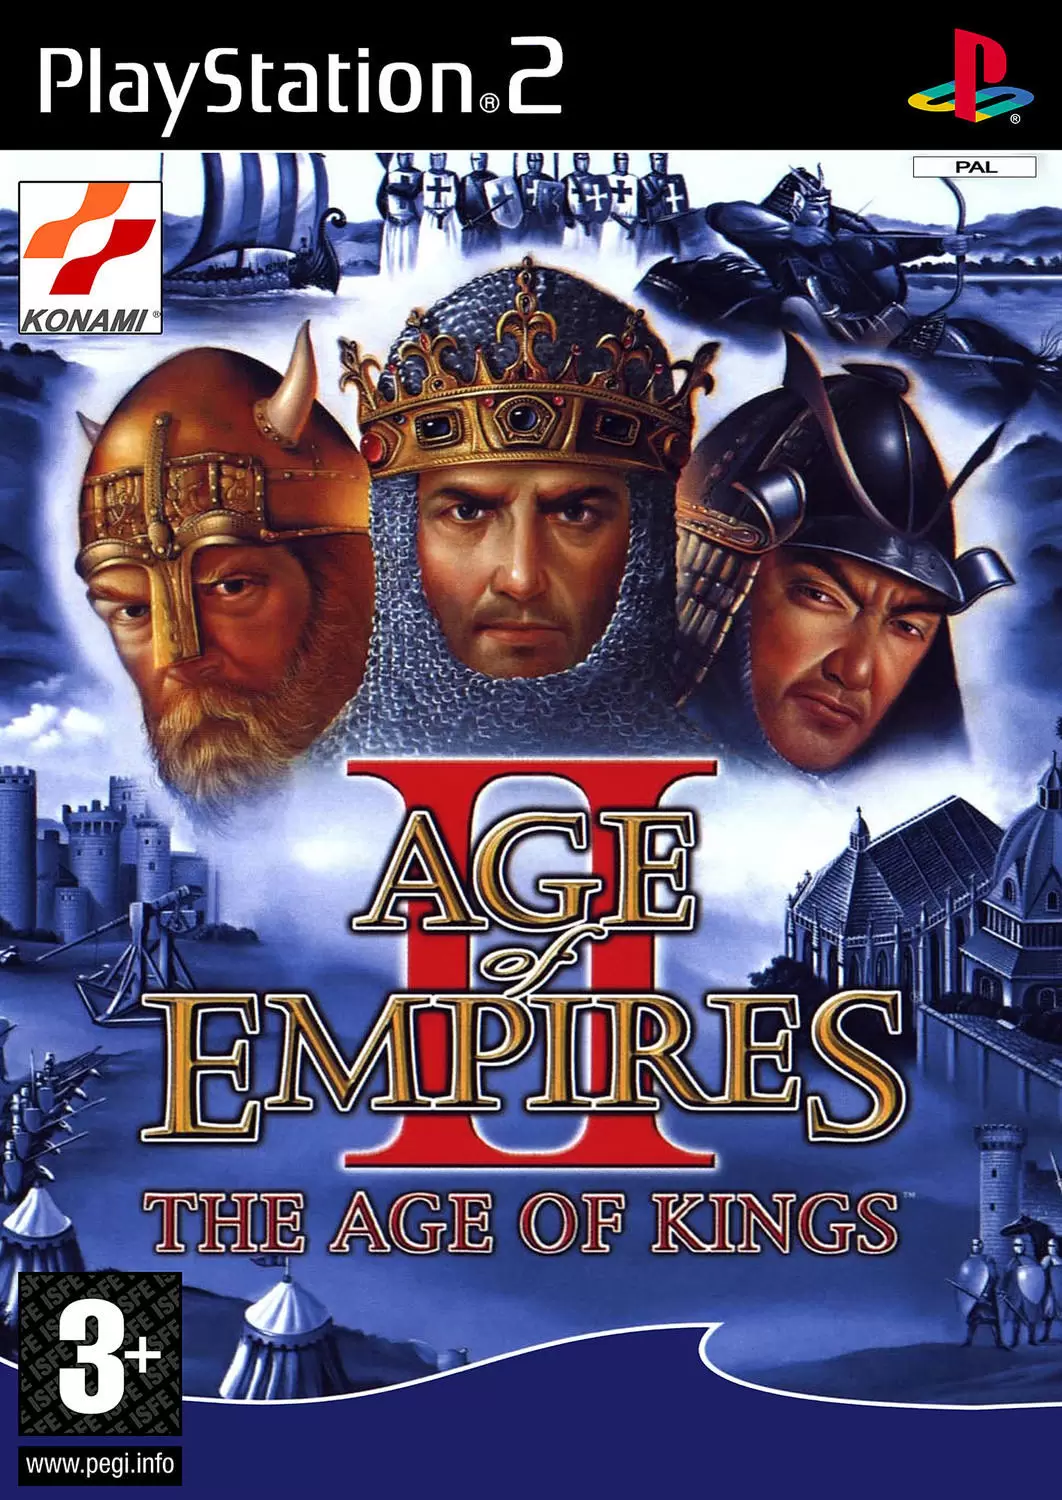 PS2 Games - Age of Empires II: The Age of Kings